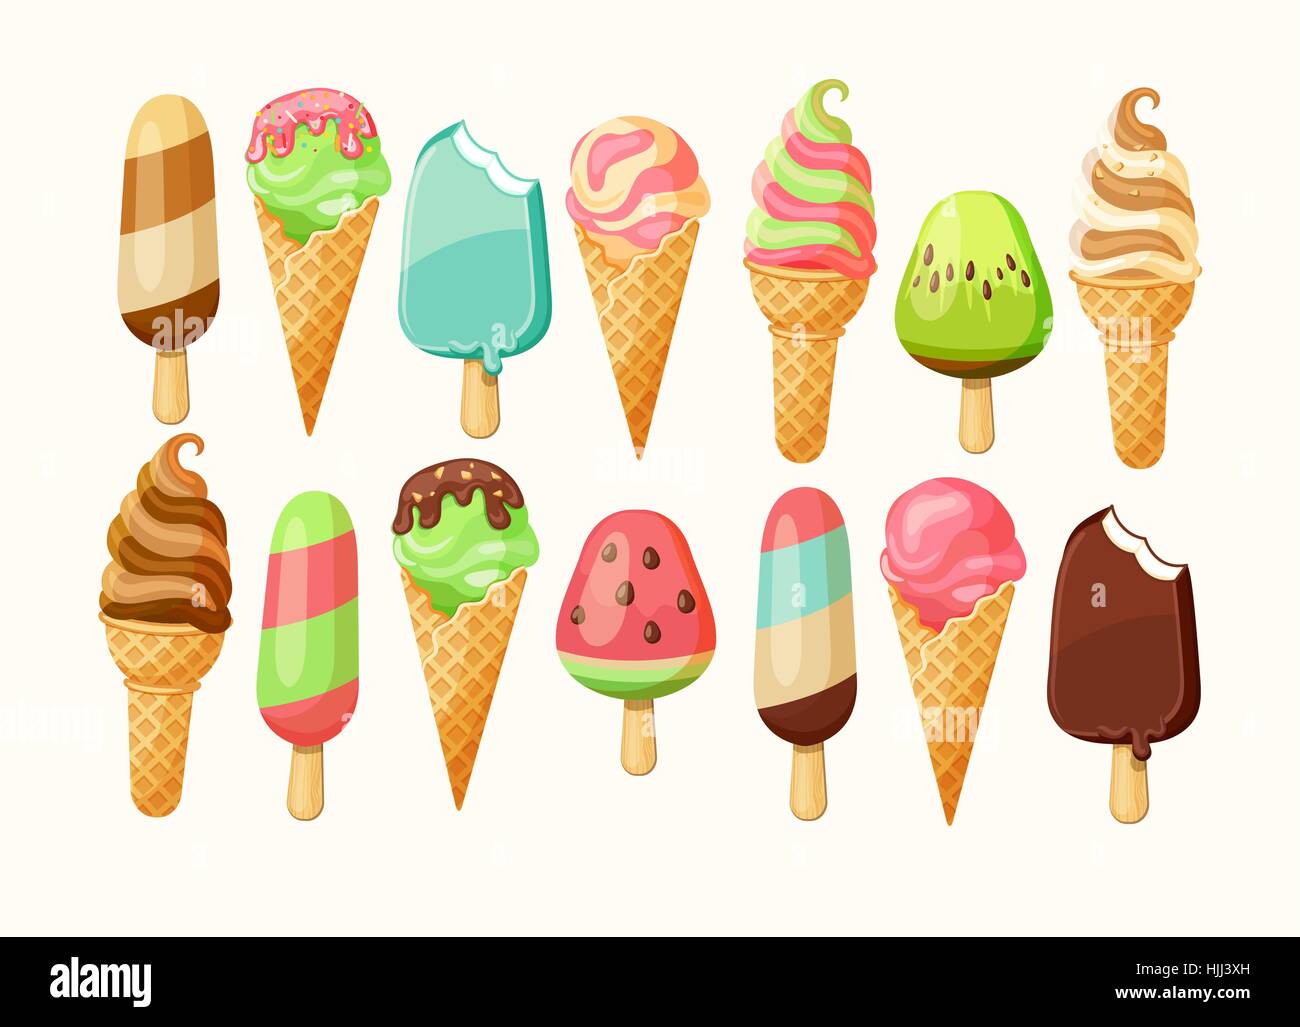 Ice cream collection of 14 items, vector illustration. Stock Vector